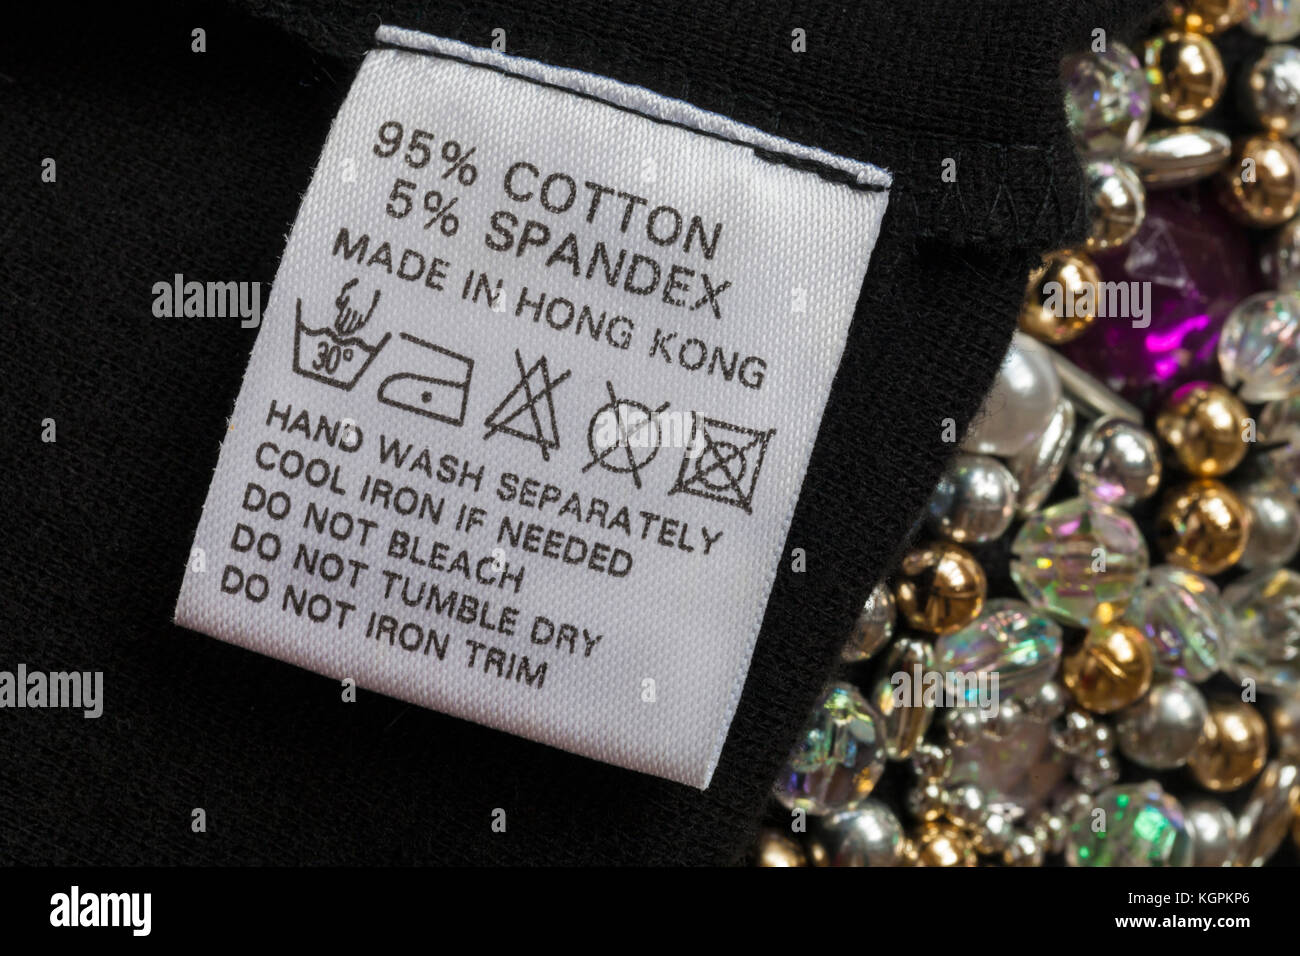 95% cotton 5% spandex label  in woman's little black dress with beads made in Hong Kong with wash care symbols and instructions Stock Photo